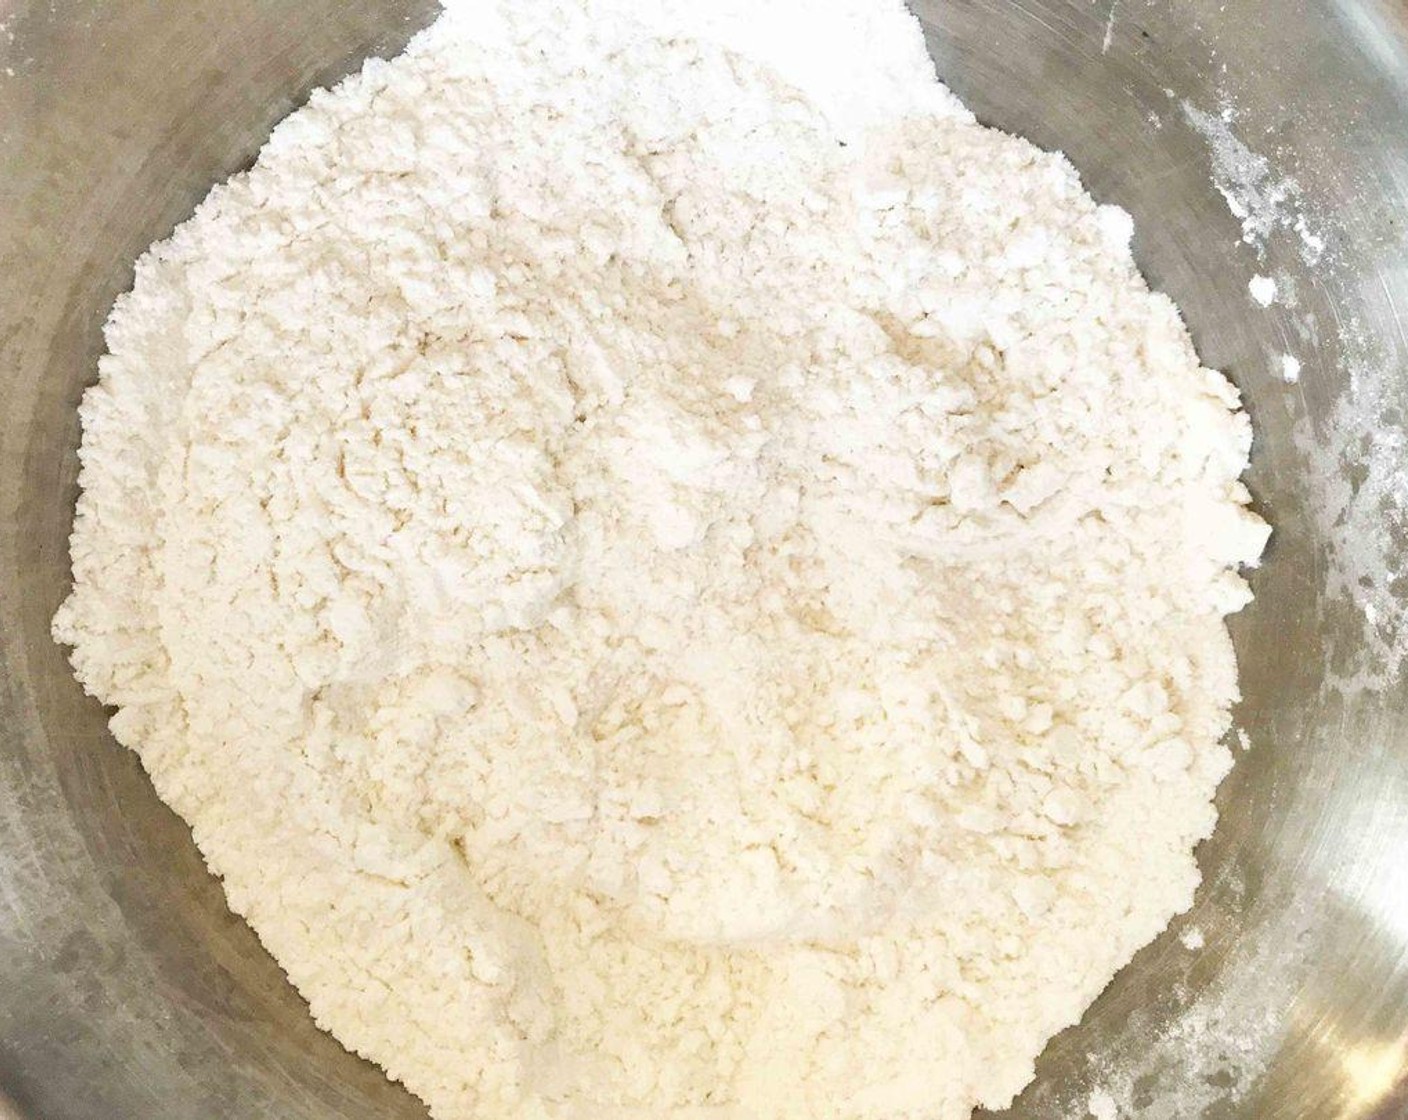 step 2 In a medium bowl, whisk together the All-Purpose Flour (2 cups), Corn Starch (1/2 Tbsp), Baking Soda (1 tsp), and Sea Salt (1/2 tsp). Set aside as well.